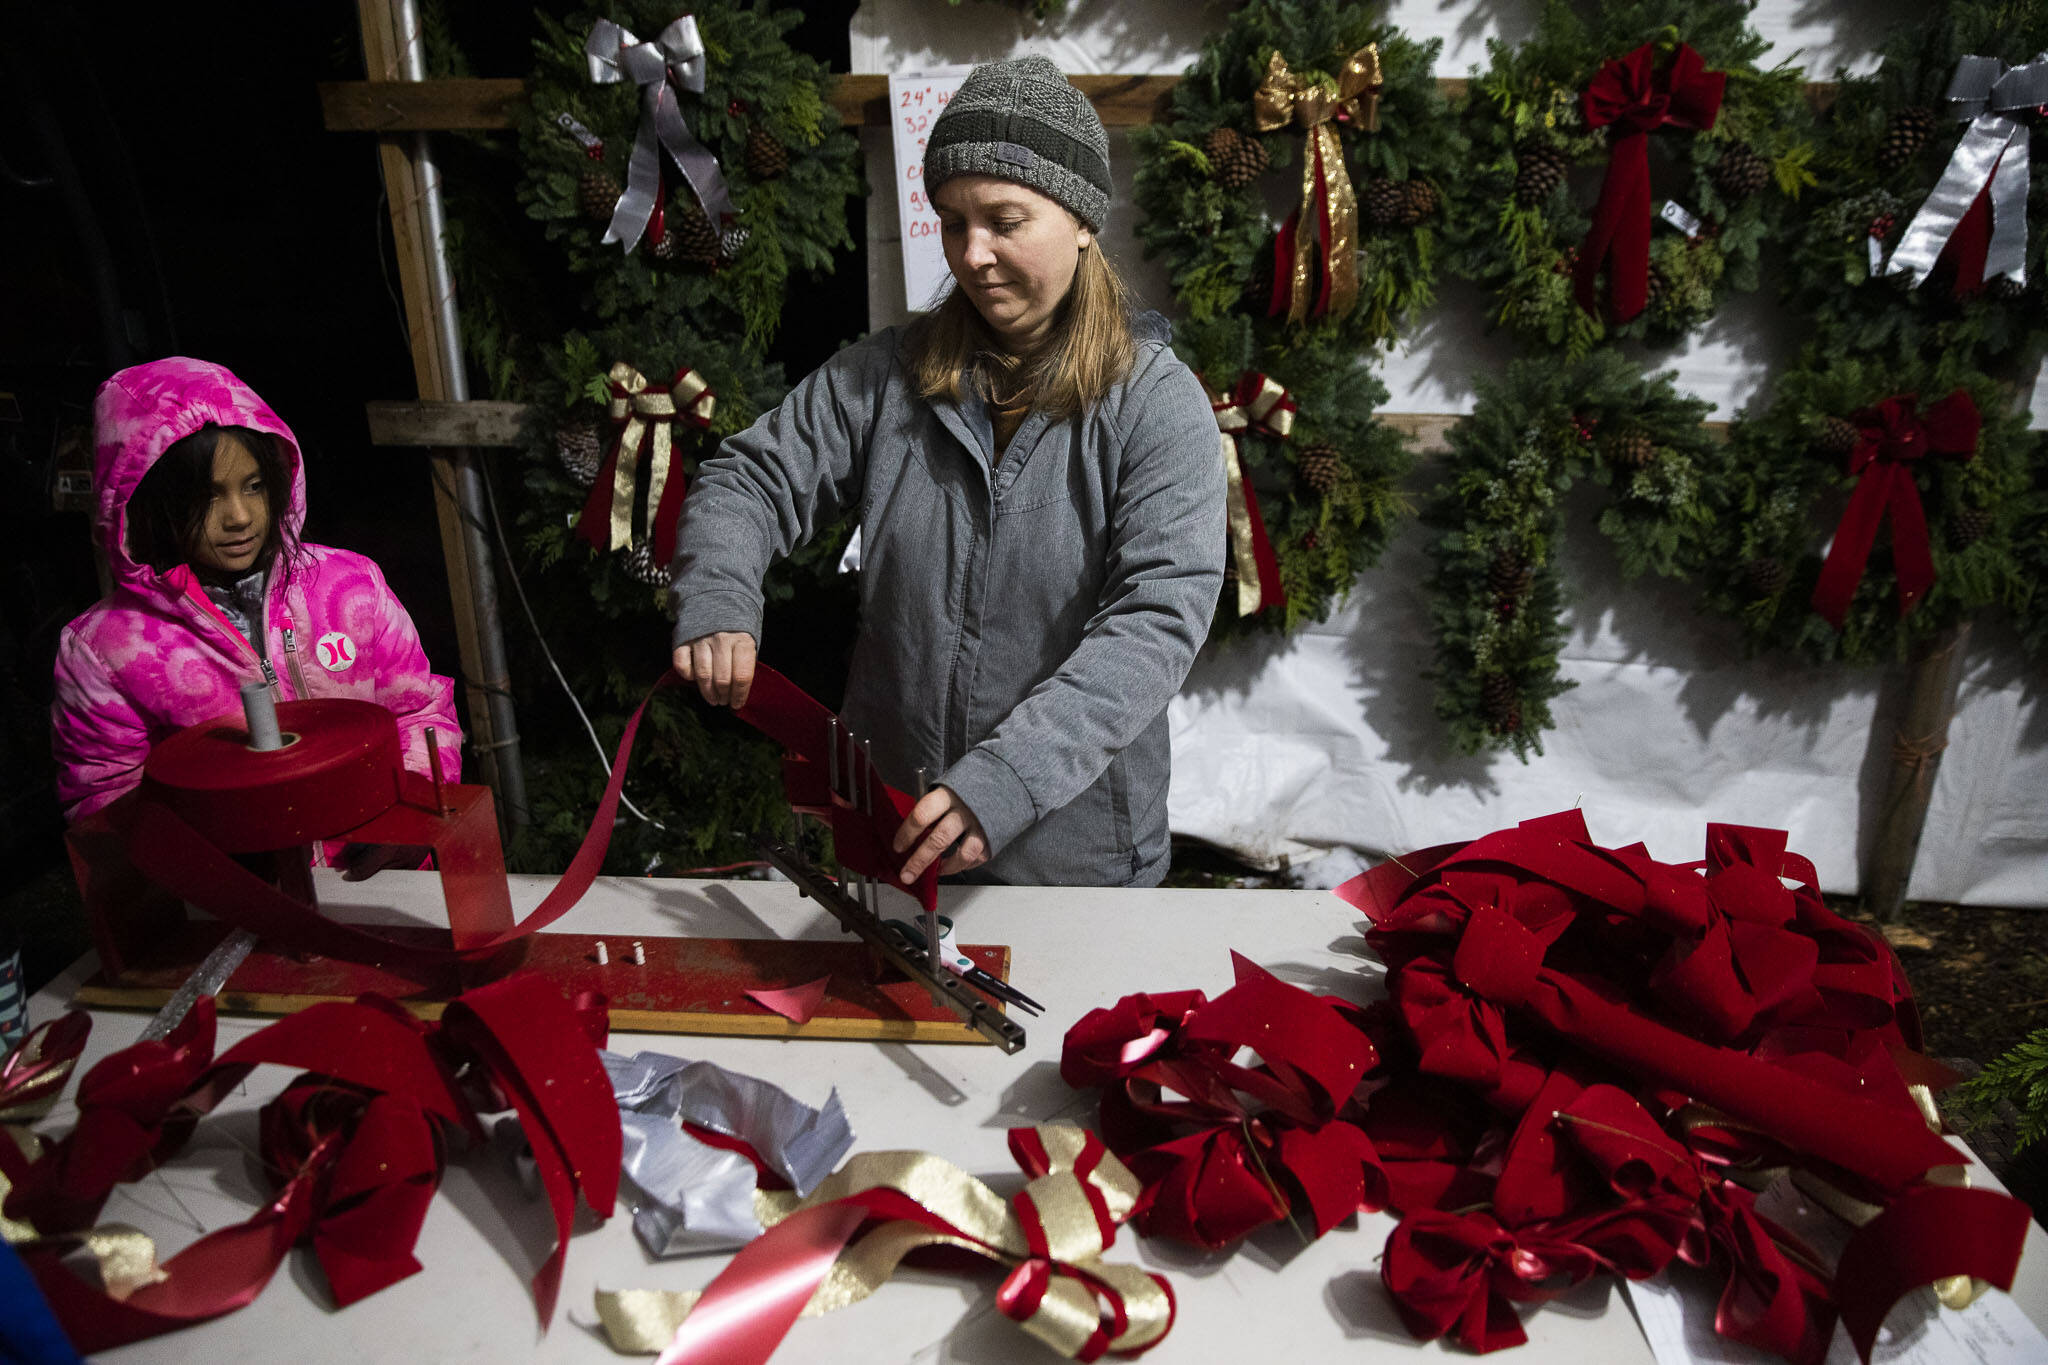 Mollie Rodriguez works on assembling bows for wreaths at the workshop on Dec. 5, in Monroe. (Olivia Vanni / The Herald)